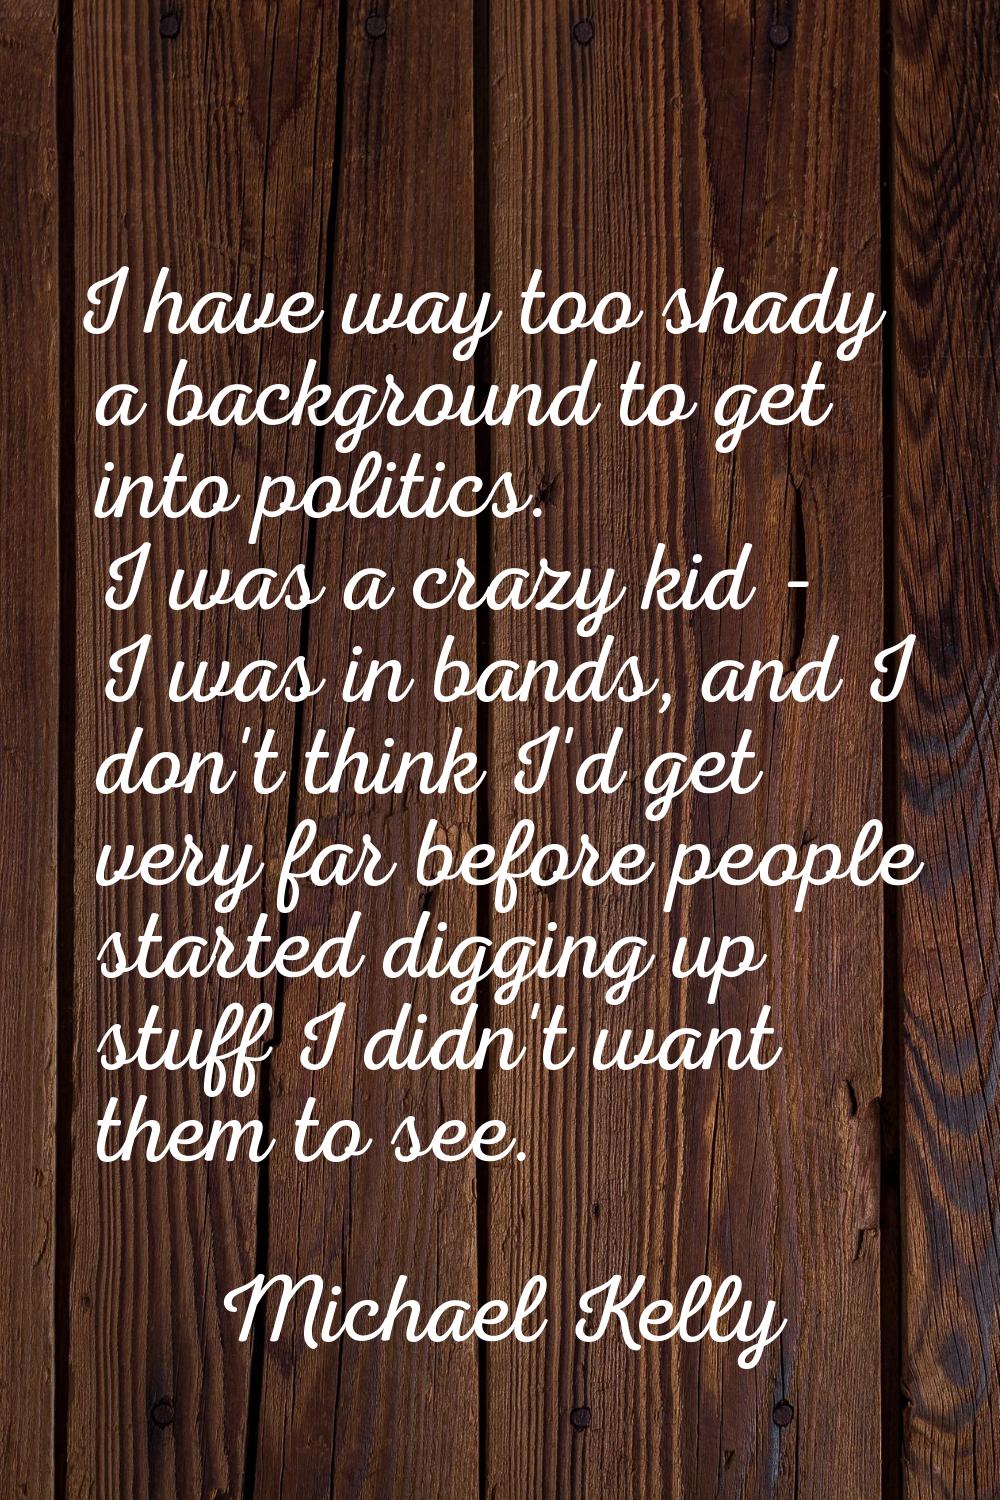 I have way too shady a background to get into politics. I was a crazy kid - I was in bands, and I d